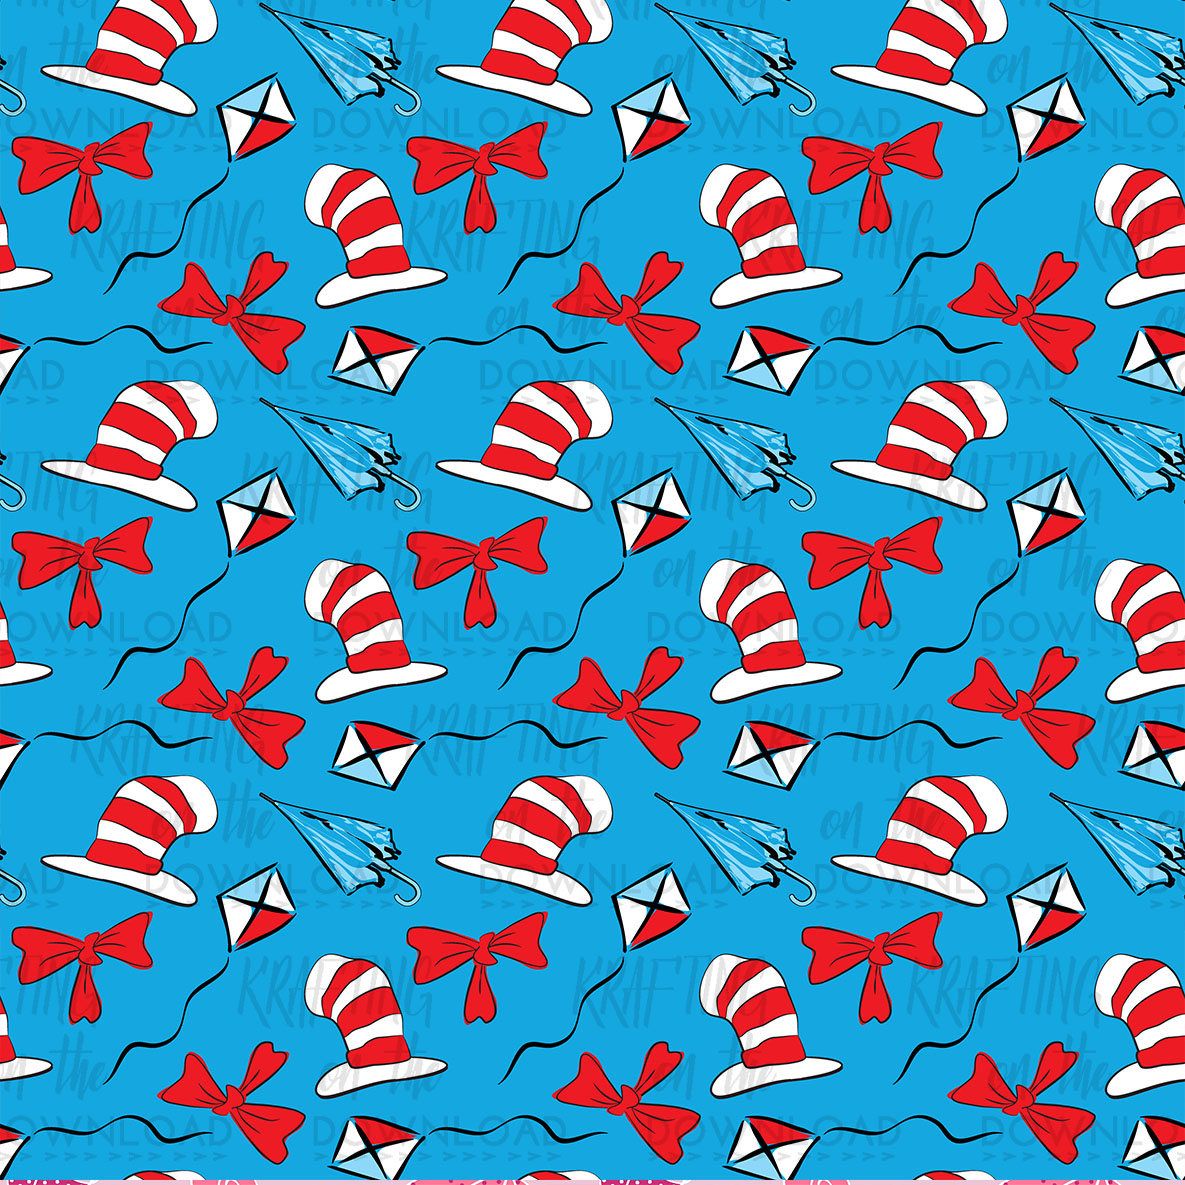 Background For Dr Seuss Yahoo Image Search Results Cute